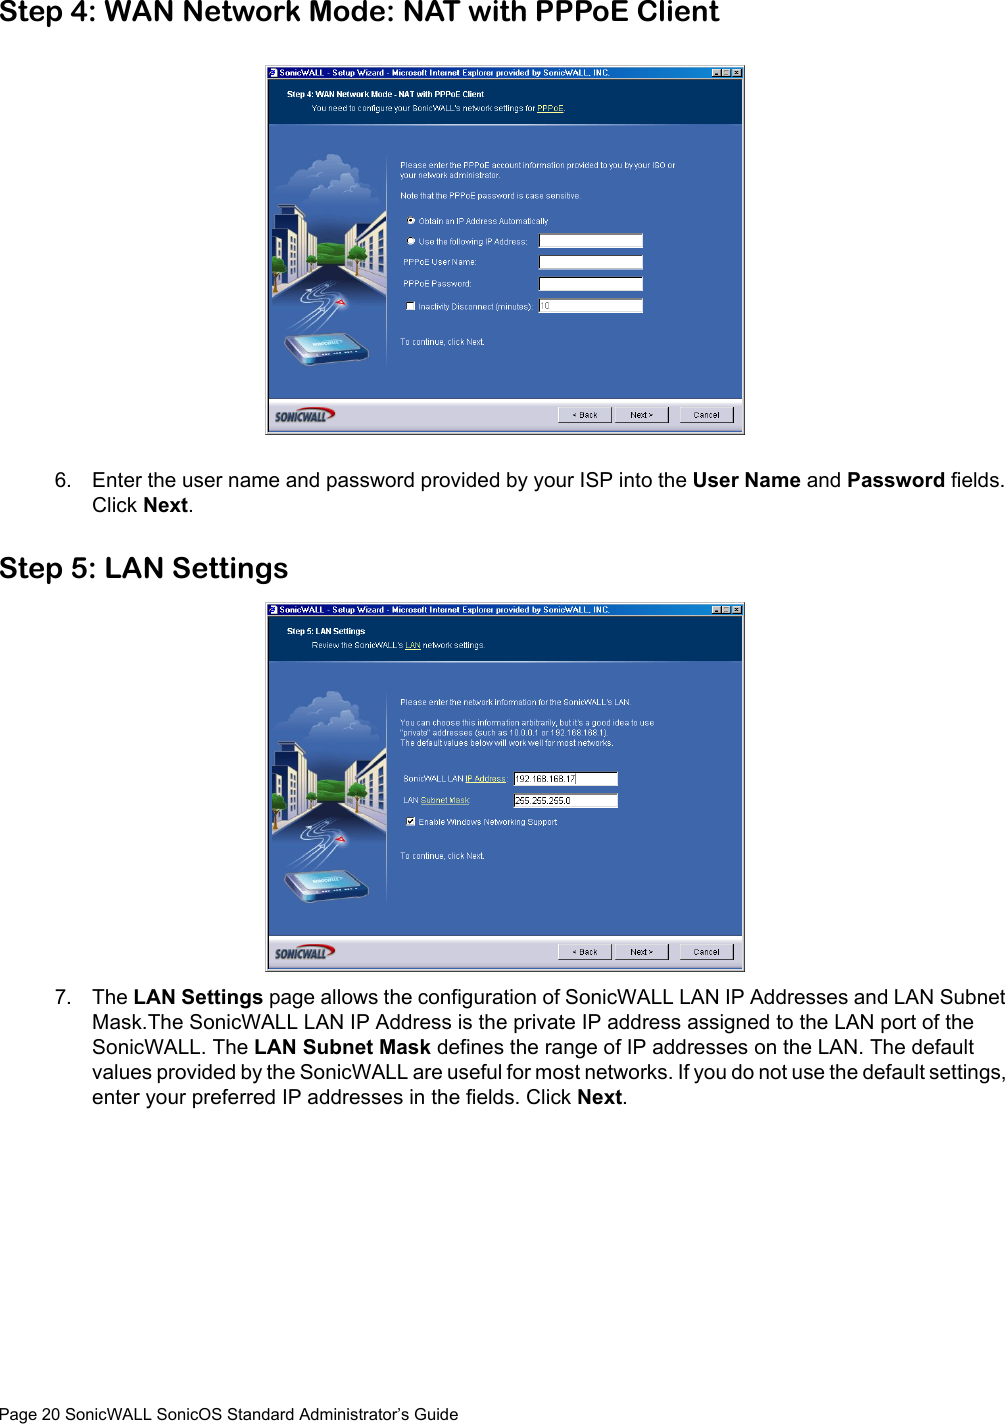 Page 20 SonicWALL SonicOS Standard Administrator’s GuideStep 4: WAN Network Mode: NAT with PPPoE Client6. Enter the user name and password provided by your ISP into the User Name and Password fields. Click Next.Step 5: LAN Settings7. The LAN Settings page allows the configuration of SonicWALL LAN IP Addresses and LAN Subnet Mask.The SonicWALL LAN IP Address is the private IP address assigned to the LAN port of the SonicWALL. The LAN Subnet Mask defines the range of IP addresses on the LAN. The default values provided by the SonicWALL are useful for most networks. If you do not use the default settings, enter your preferred IP addresses in the fields. Click Next.